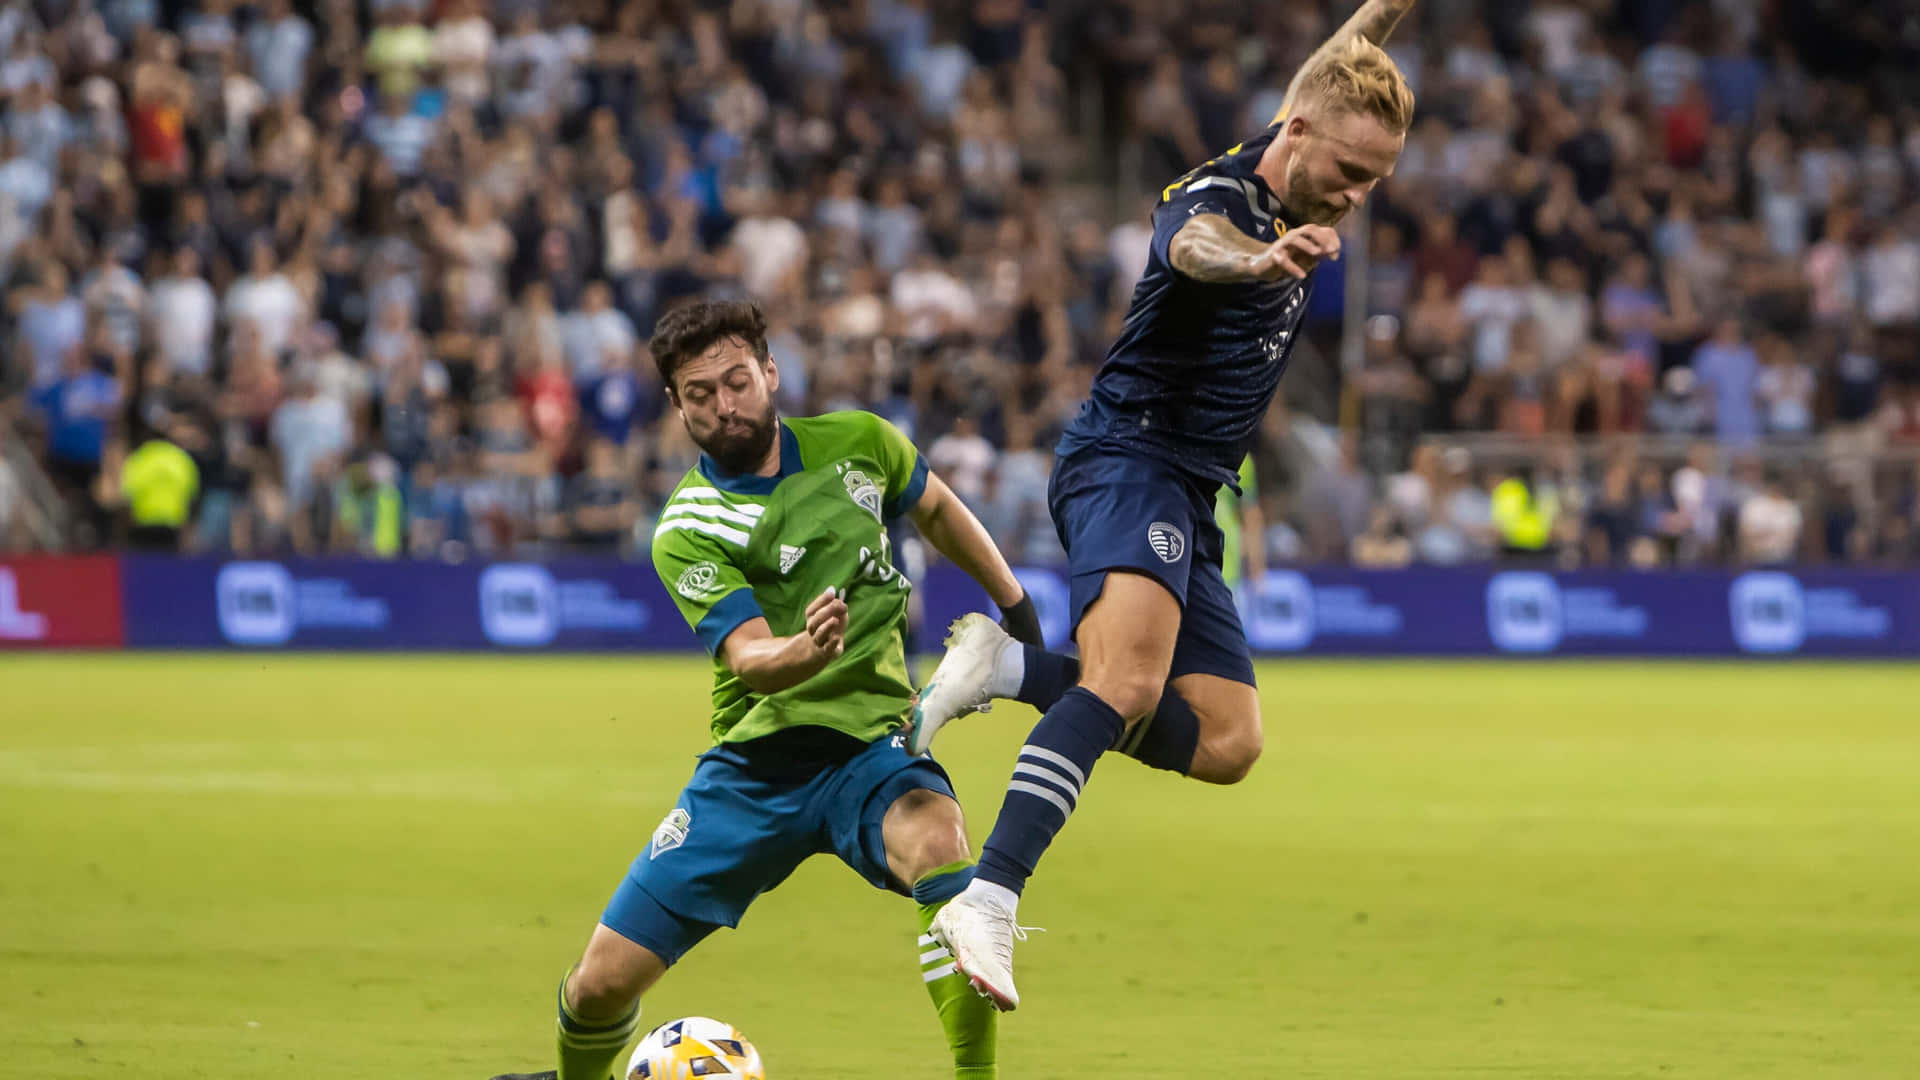 Johnny Russell Versus Seattle Sounders Football Club Wallpaper